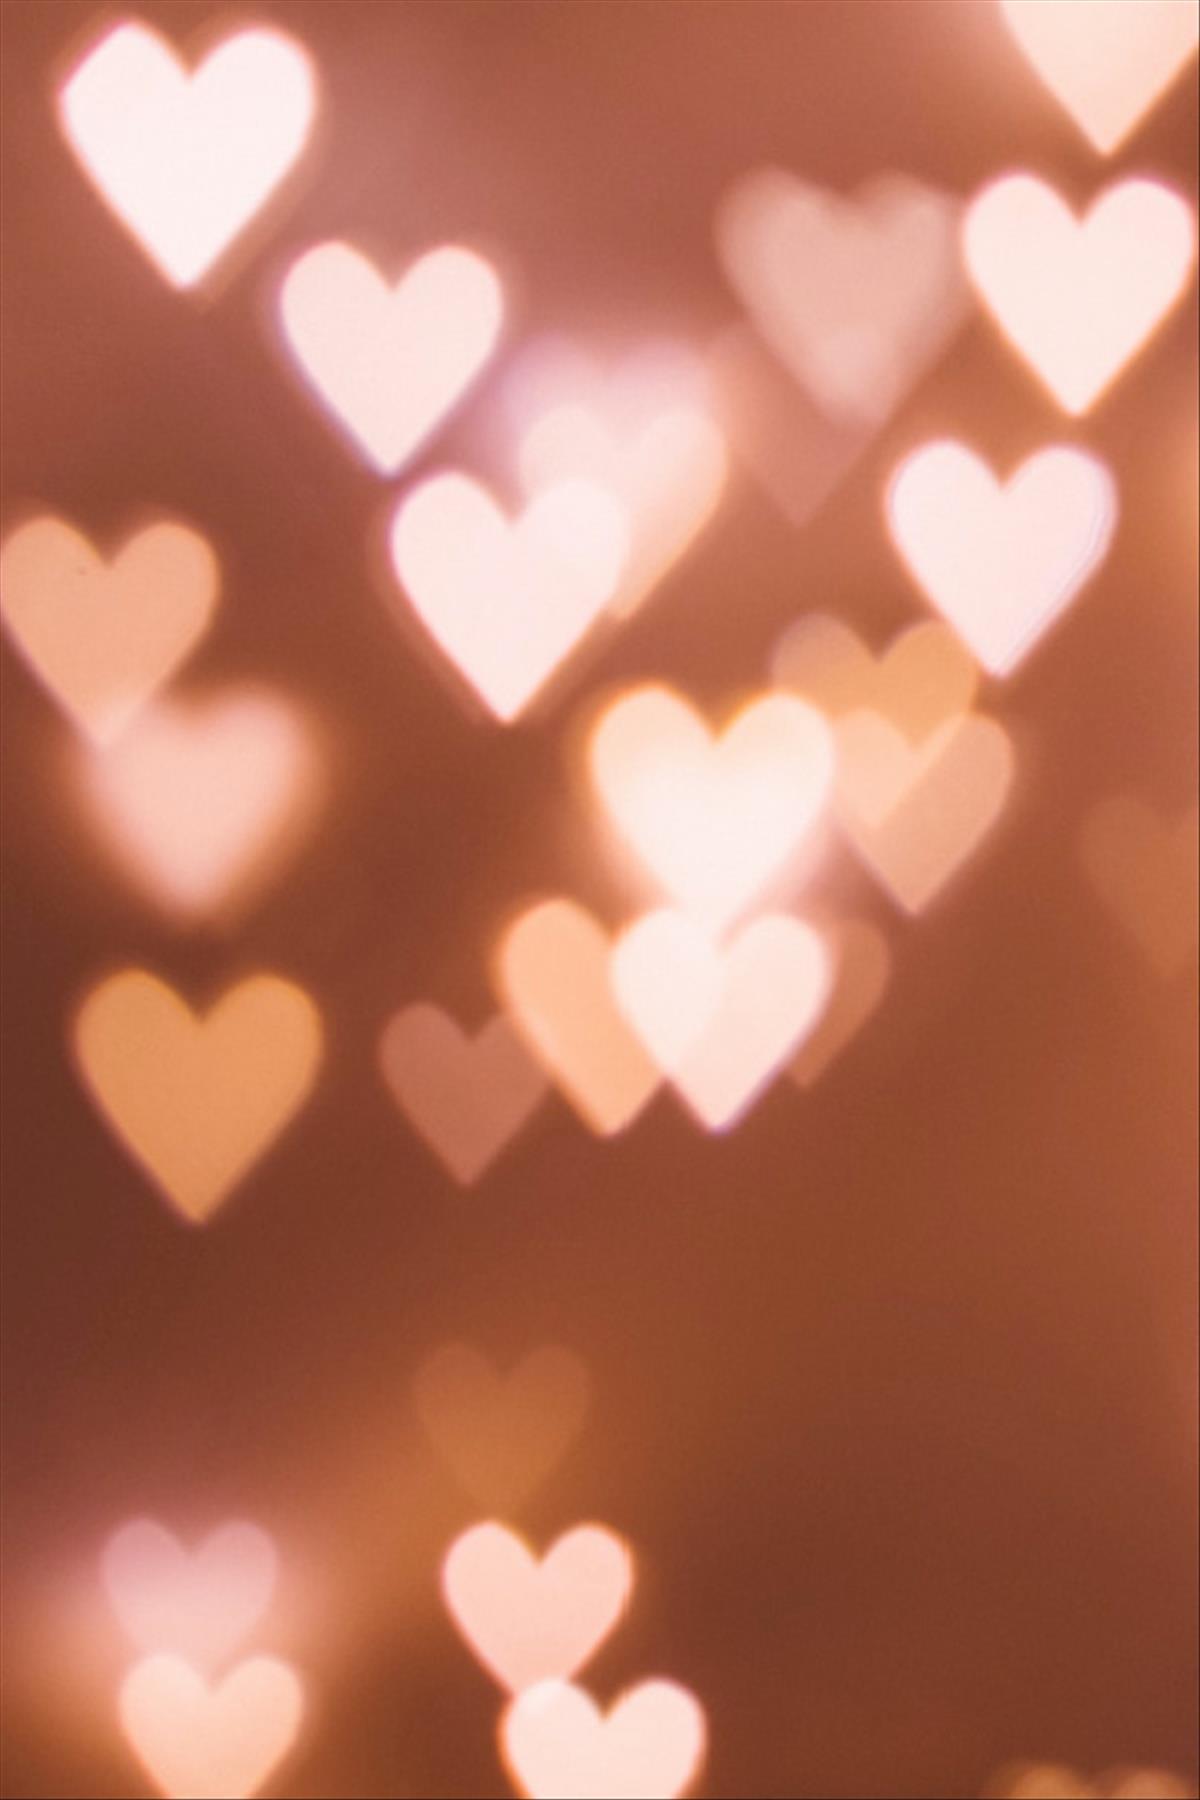 Romantic Valentine’s Day Aesthetic Wallpaper For Your Phone!